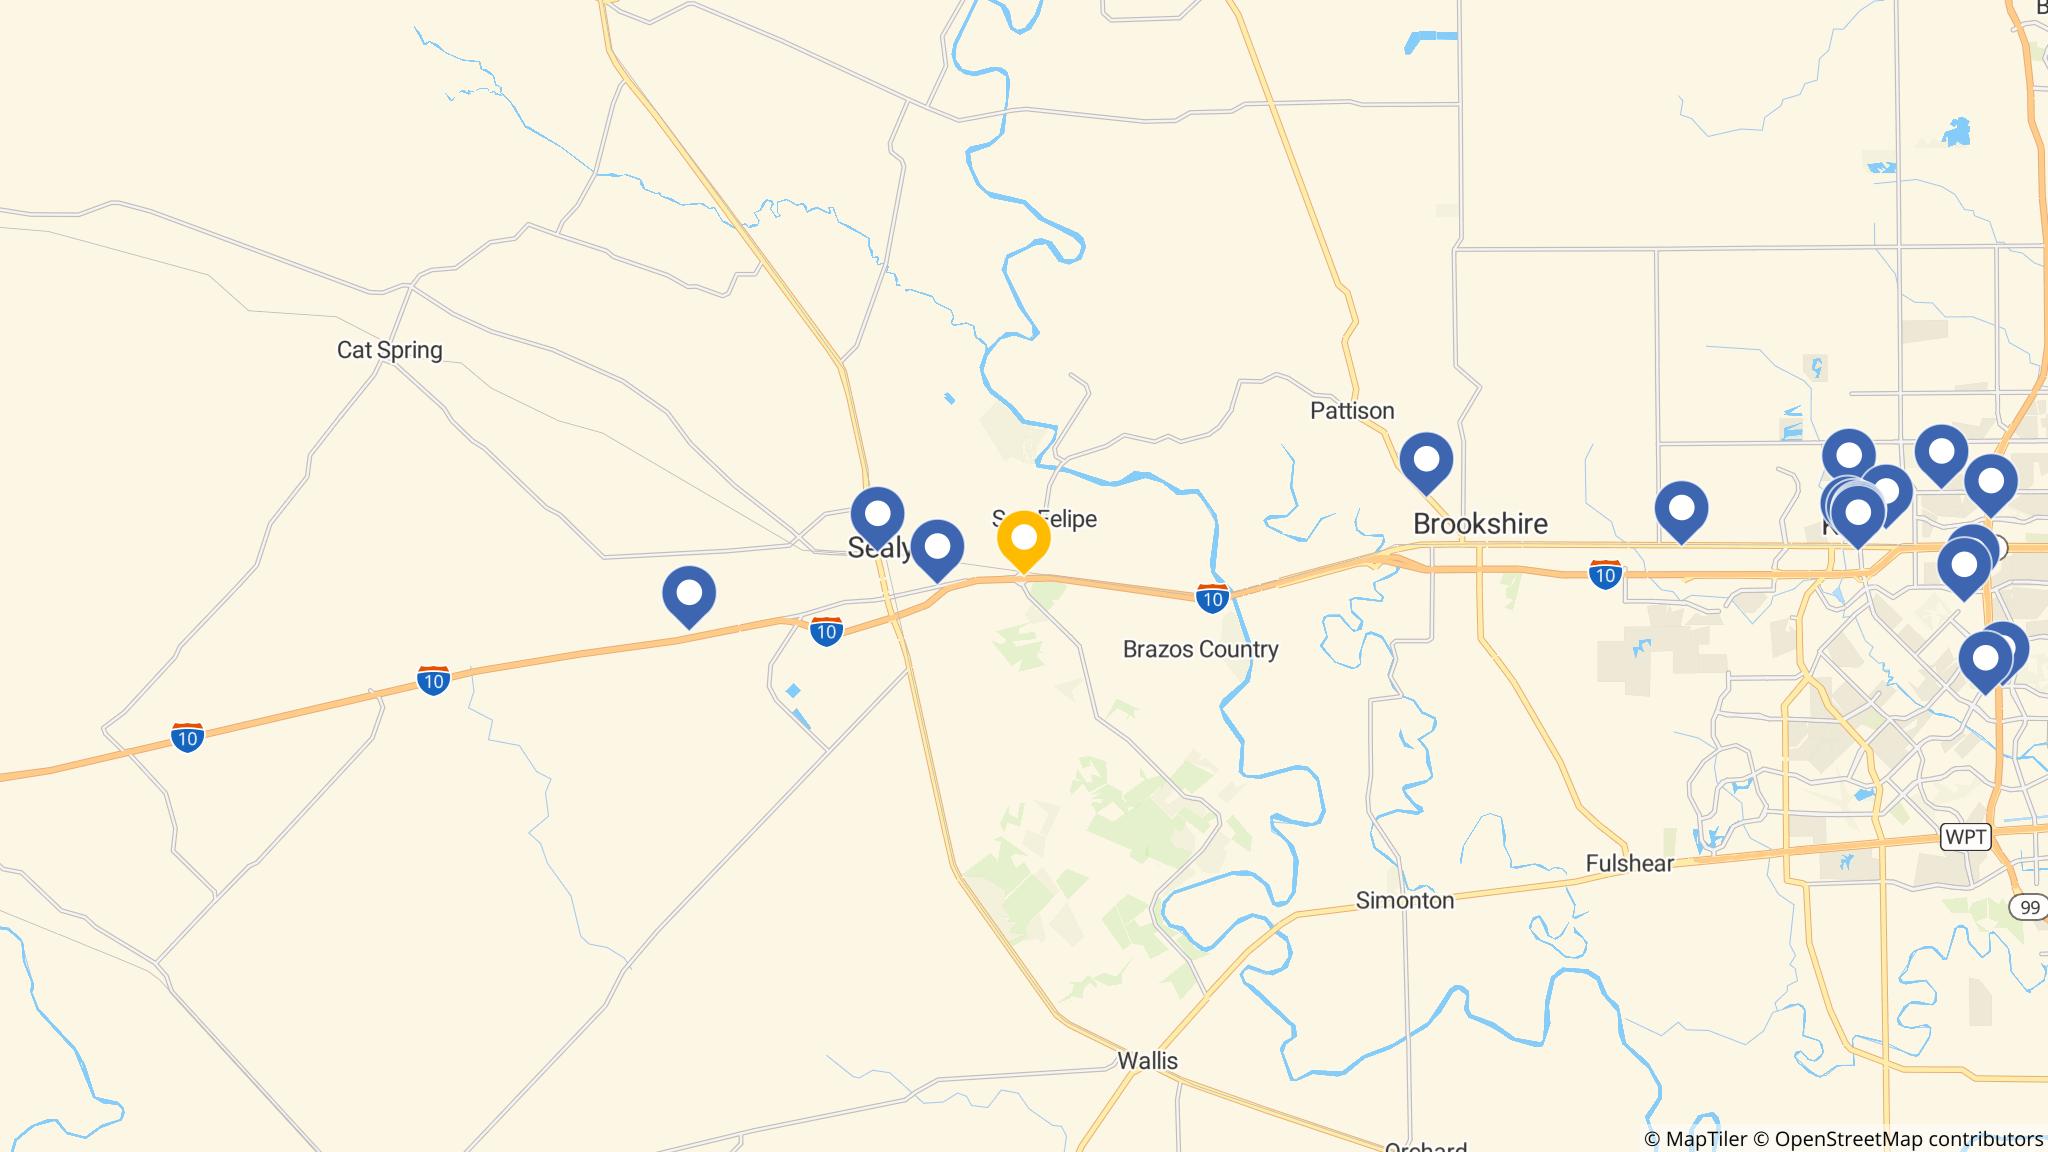 Street map of the ATM area